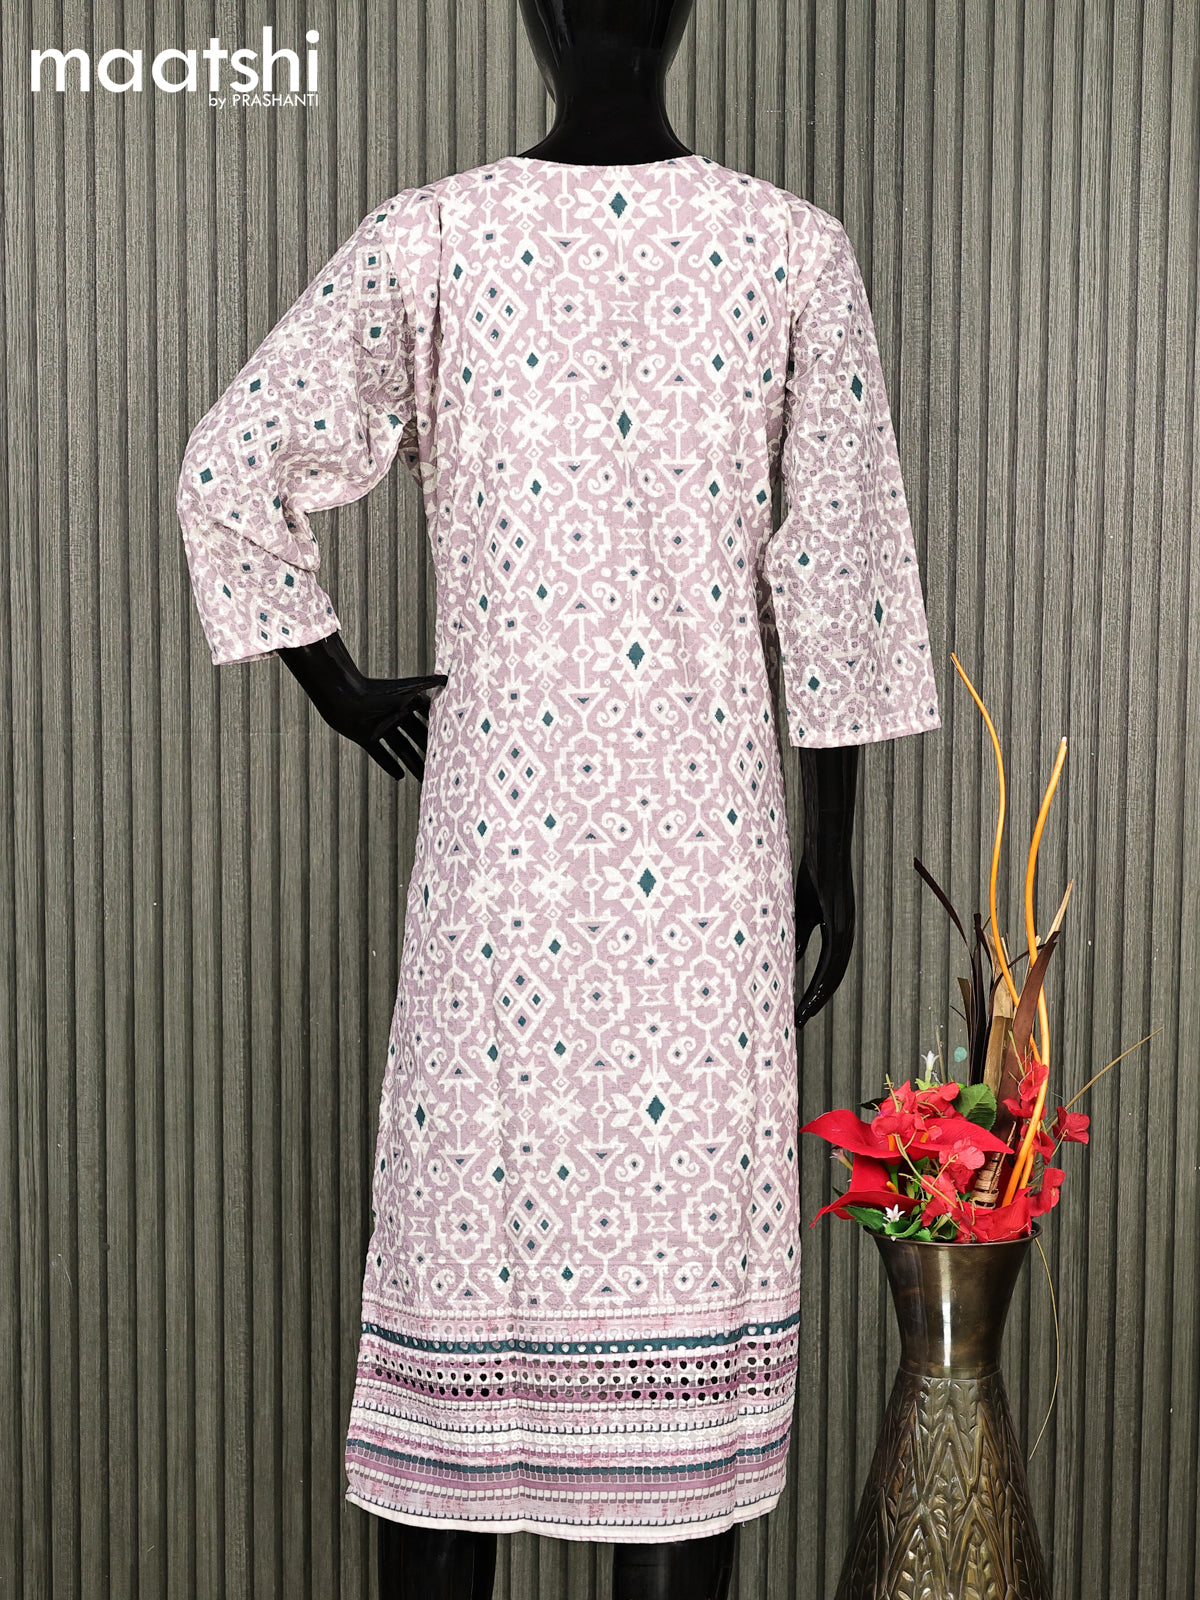 Cotton readymade kurti mild purple and off white with allover batik prints & embroidery work without pant